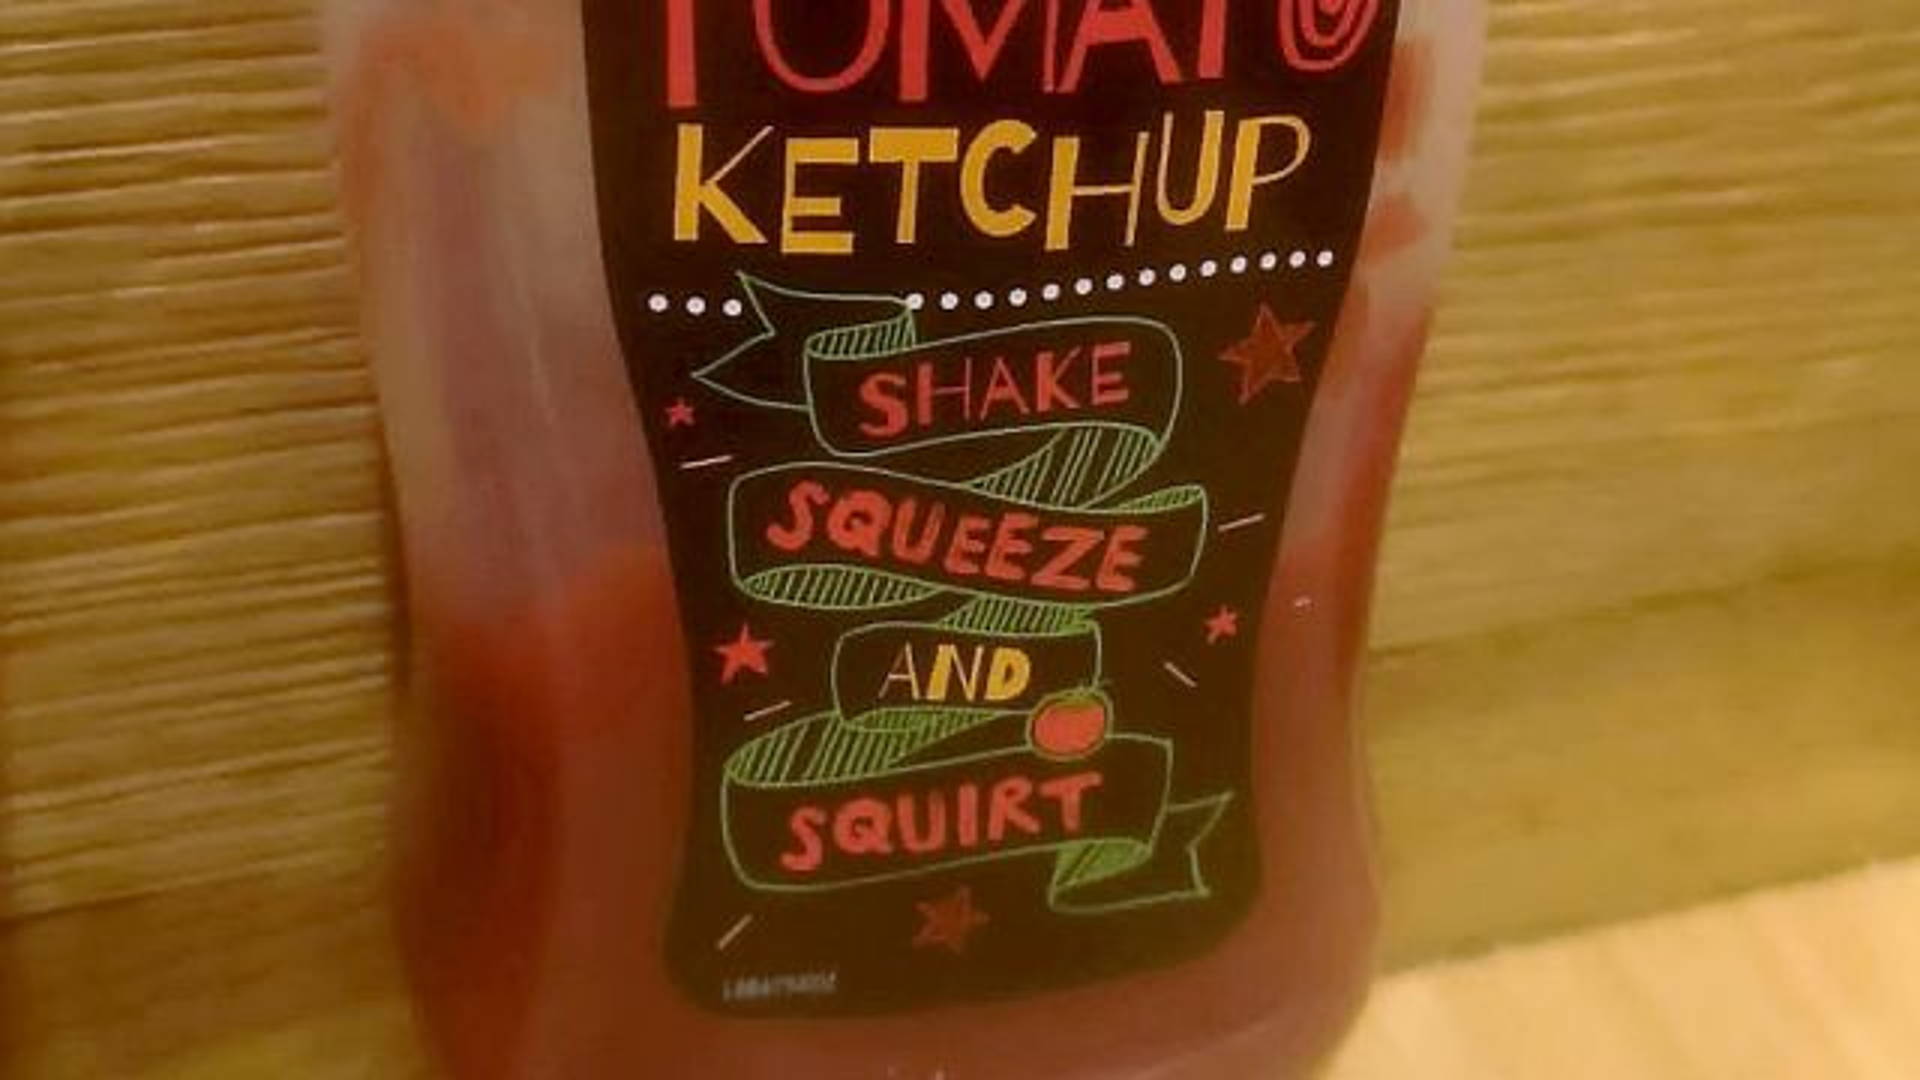 Featured image for Apparently, Pizza Hut’s Ketchup Bottles Are Oversexualized. Also, Pizza Hut Has Ketchup?